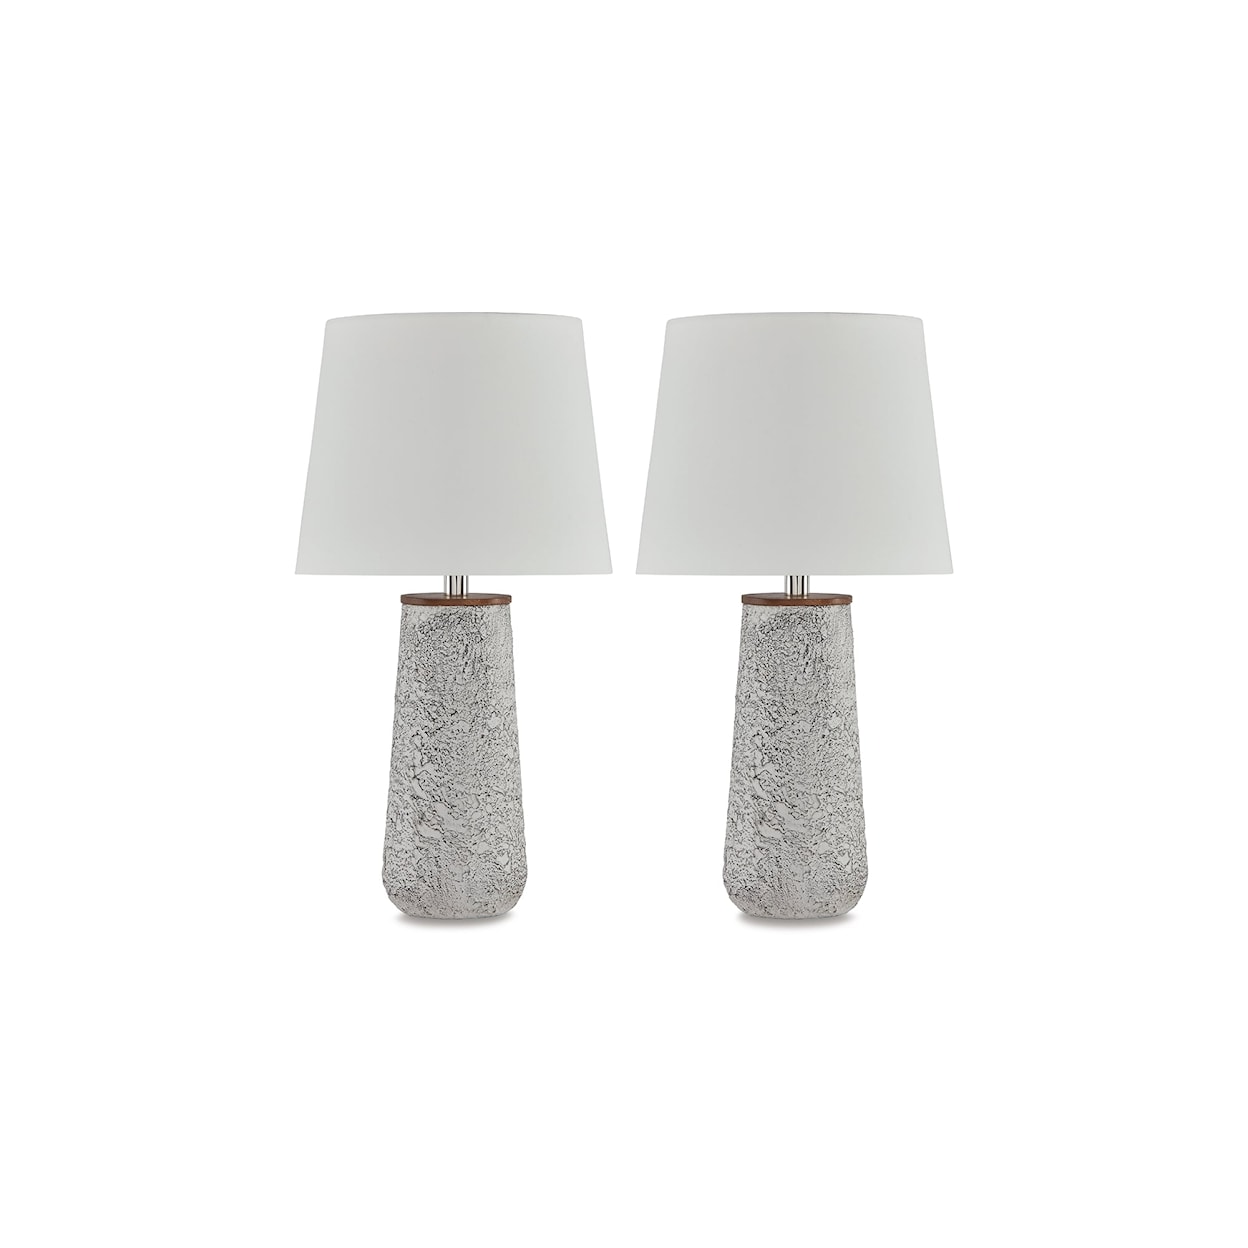 Signature Design by Ashley Chaston Metal Table Lamp (Set of 2)